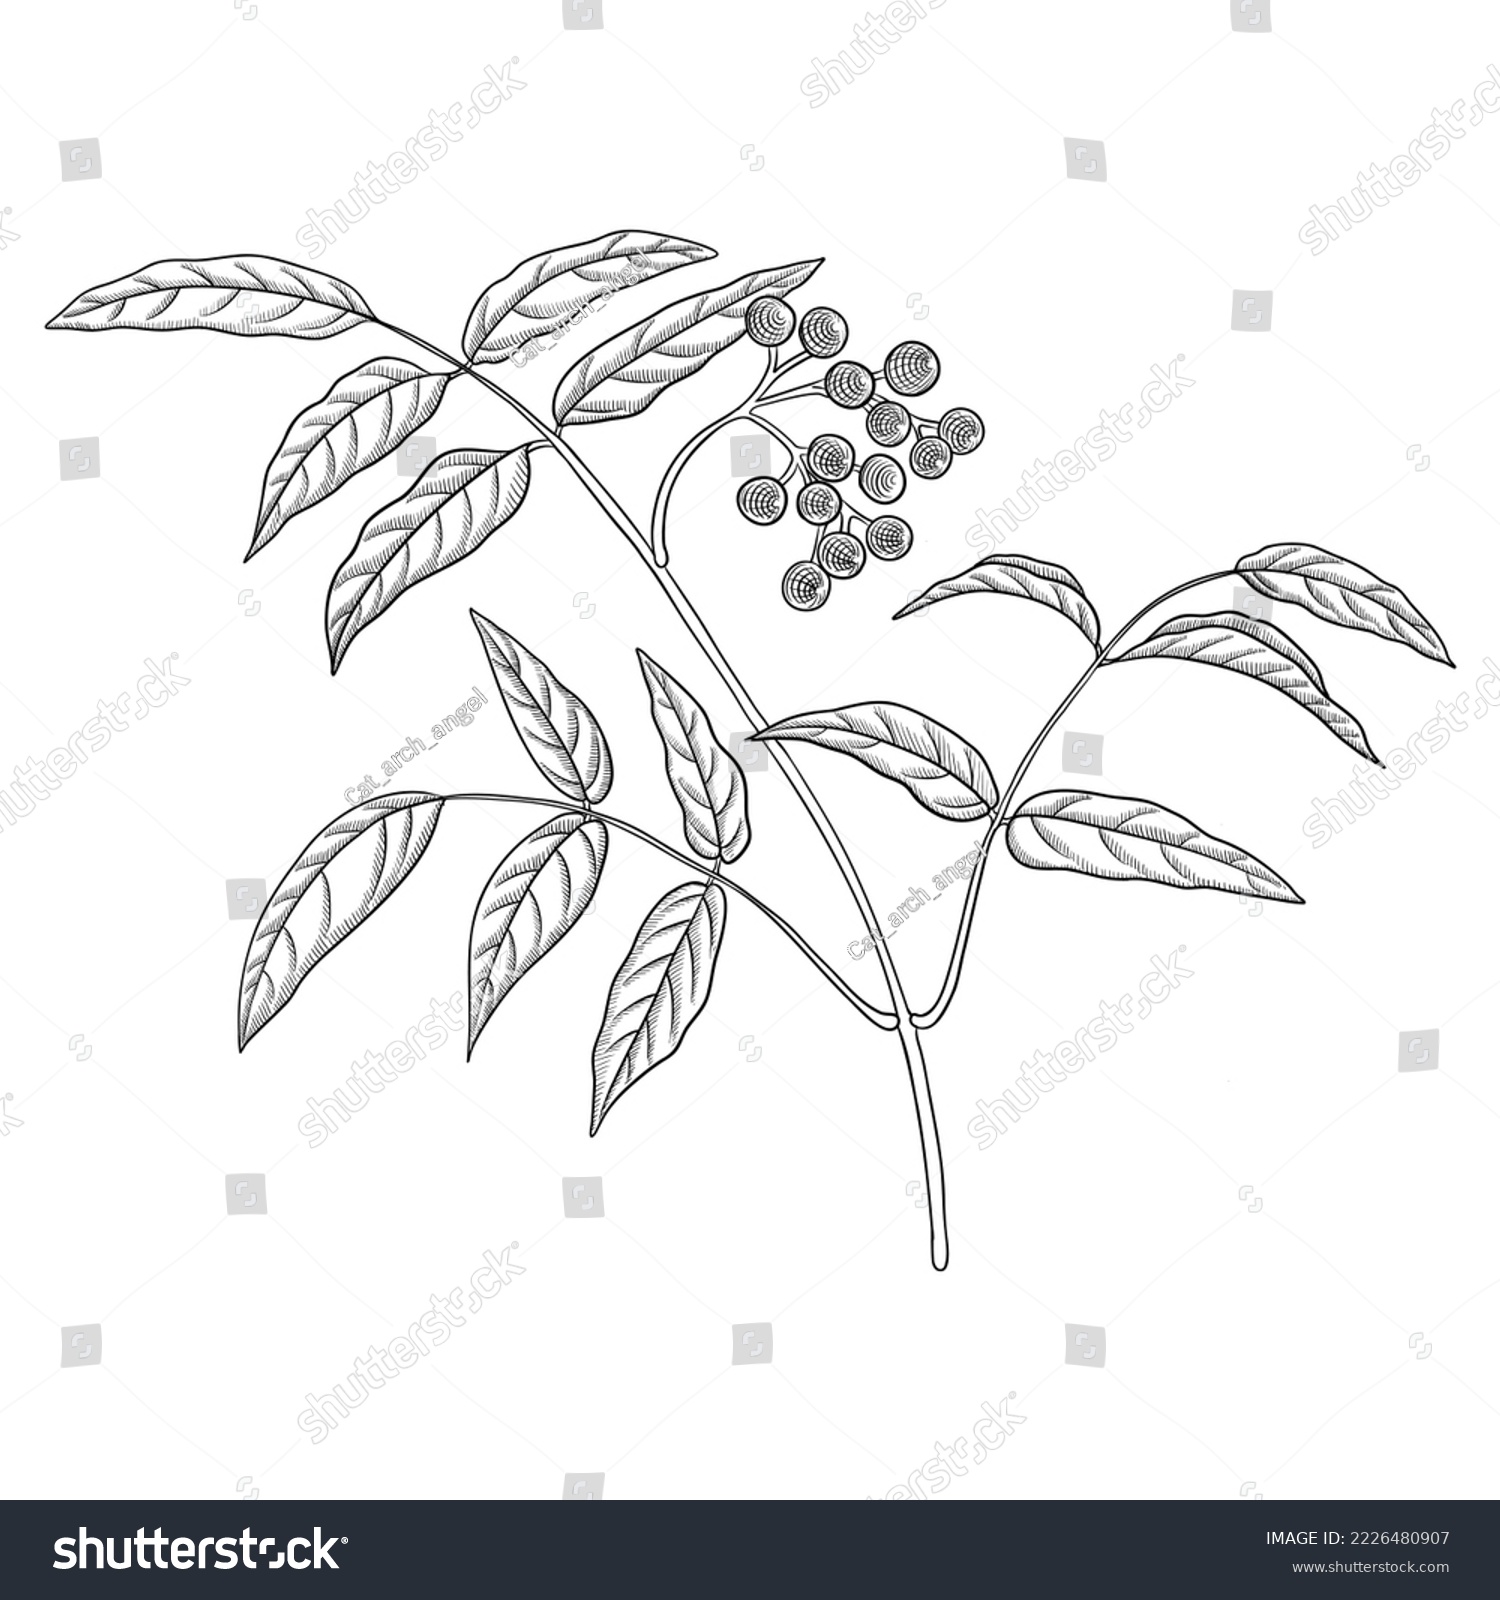 SVG of vector drawing branch of Amur cork tree with leaves and berries, Phellodendron amurense, herb of traditional chinese medicine, hand drawn illustration svg